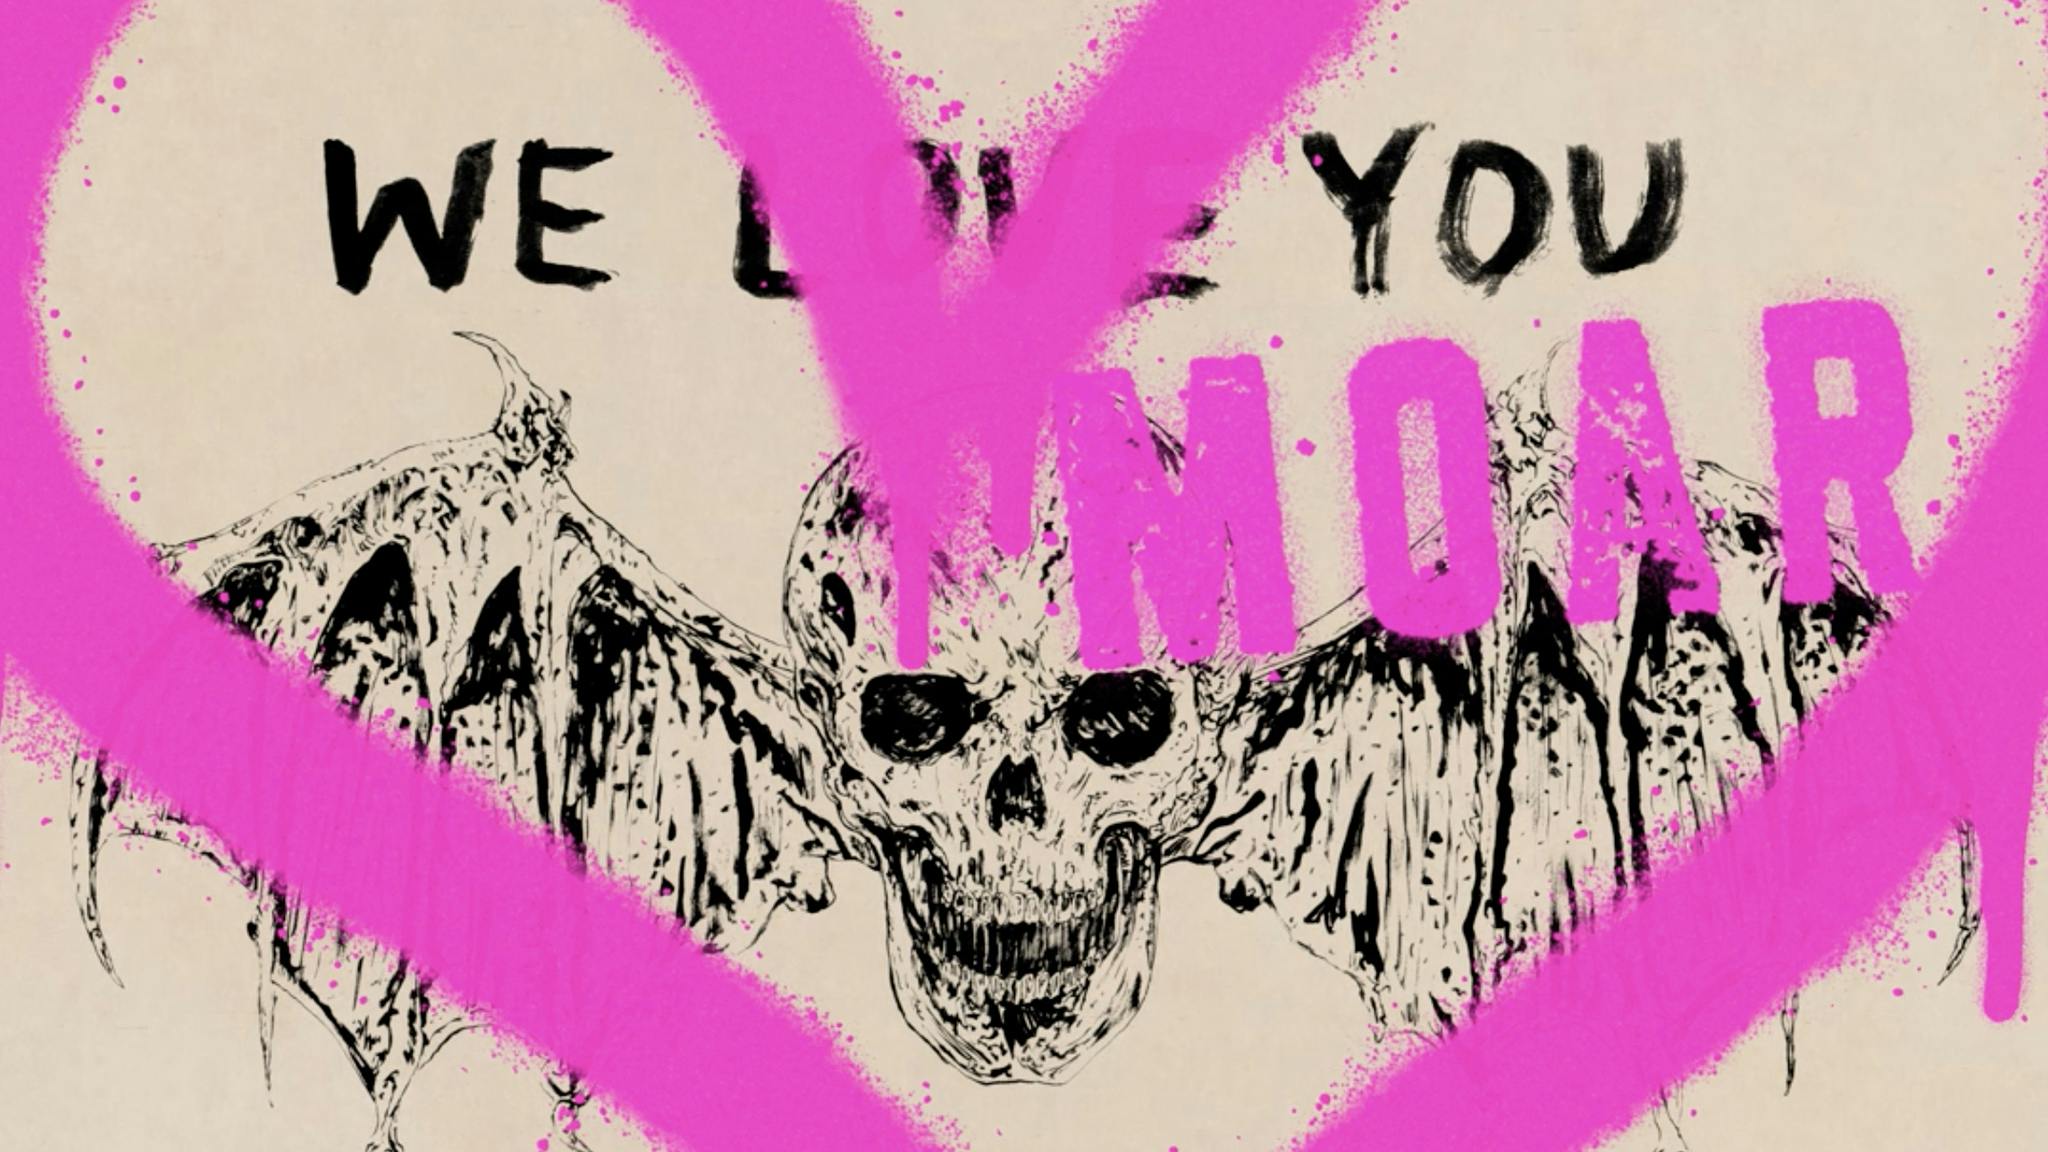 Avenged Sevenfold release new version of We Love You featuring Pussy Riot